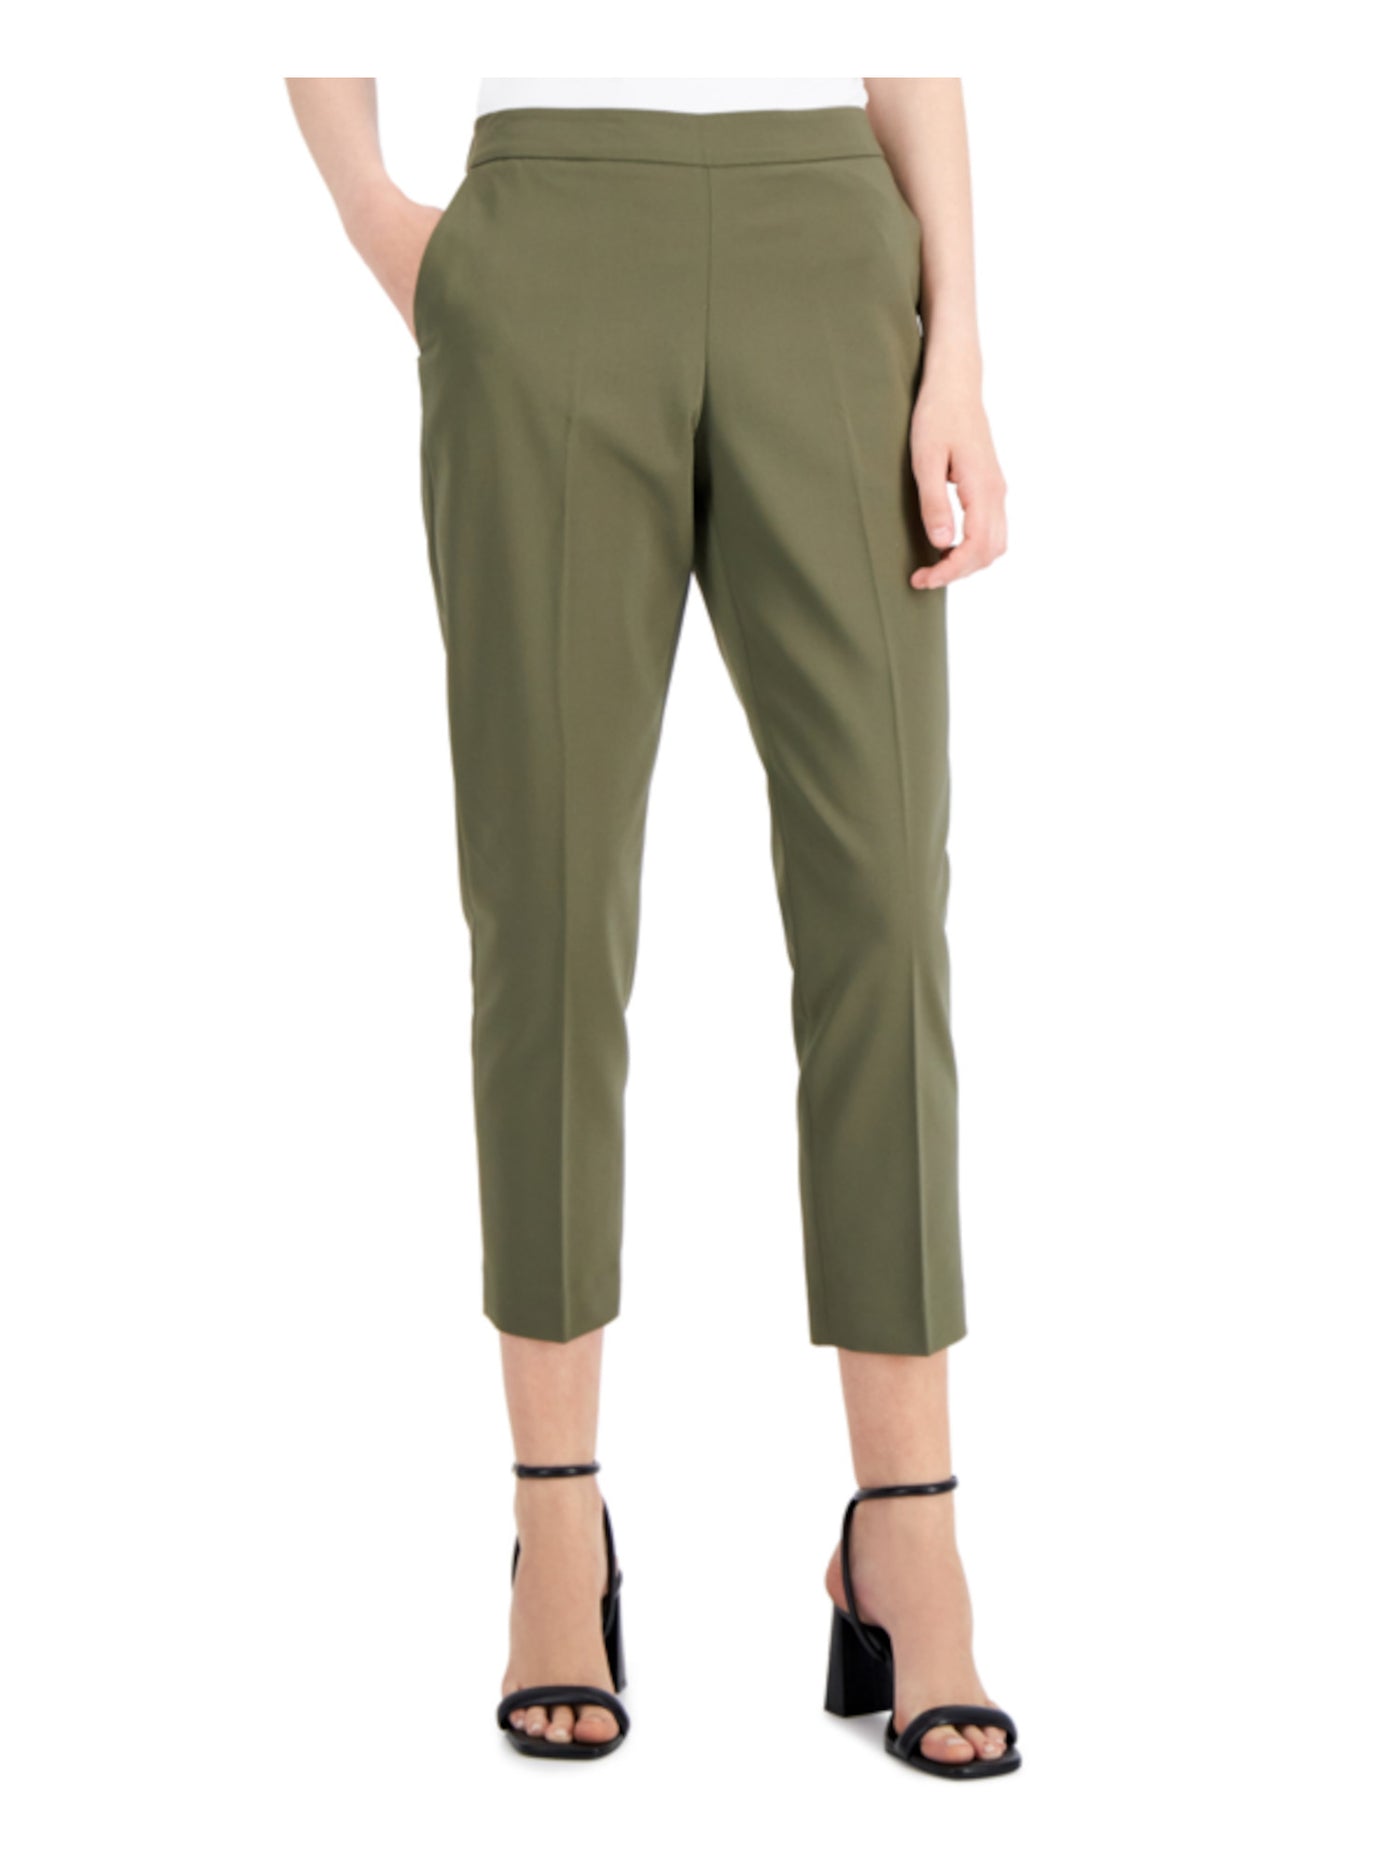 CALVIN KLEIN Womens Green Pocketed Elastic Back Slim Fit Cropped Wear To Work Straight leg Pants 6